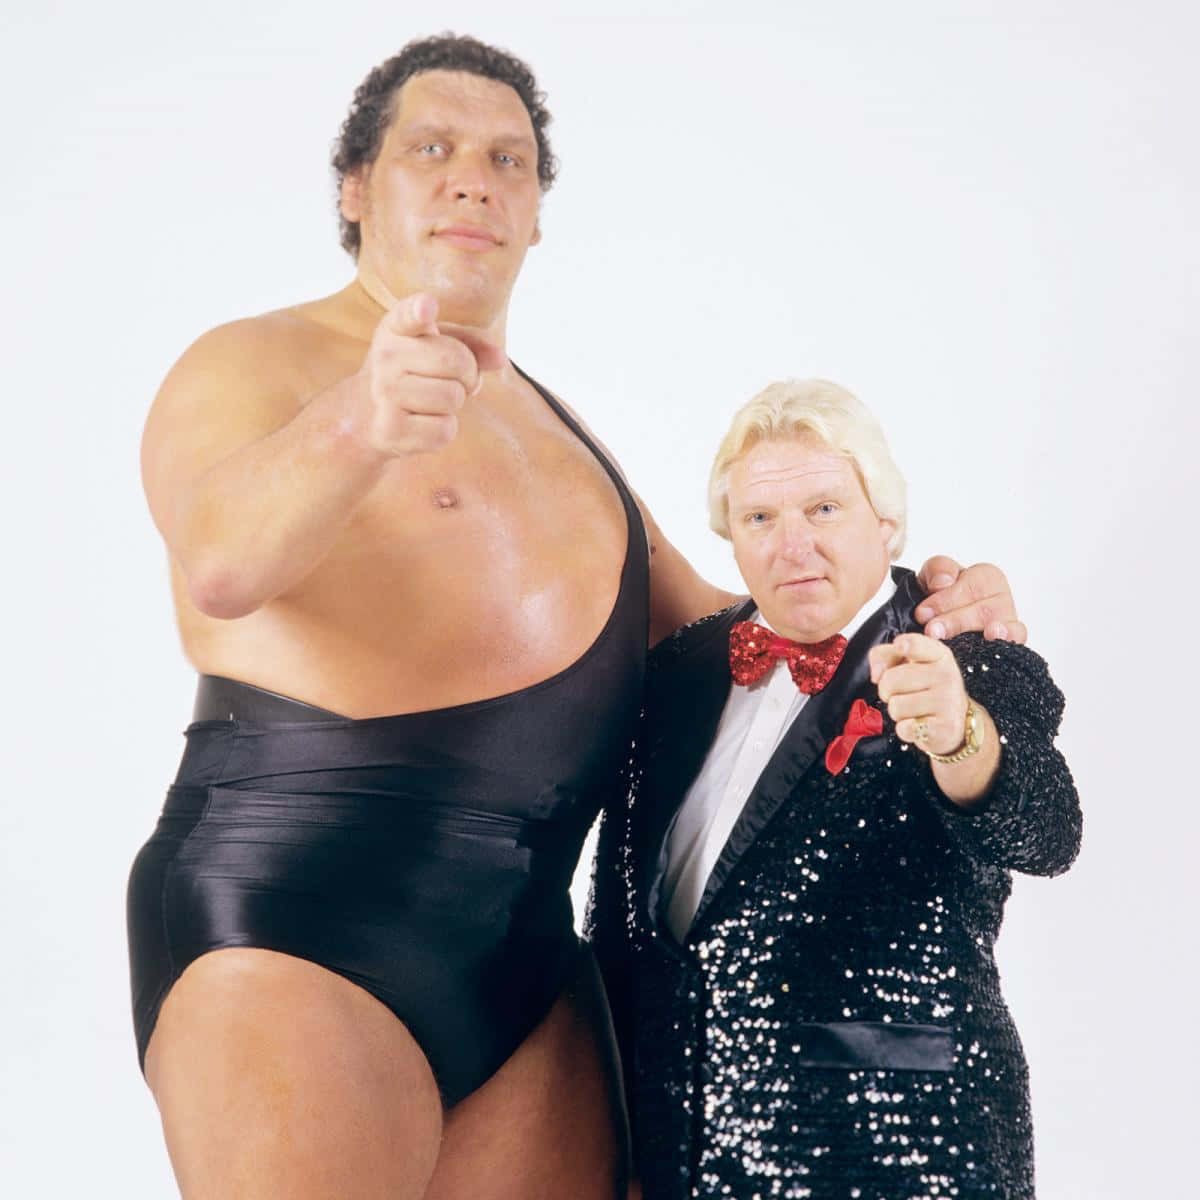 Bobby Heenan And André René Roussimoff Wallpaper